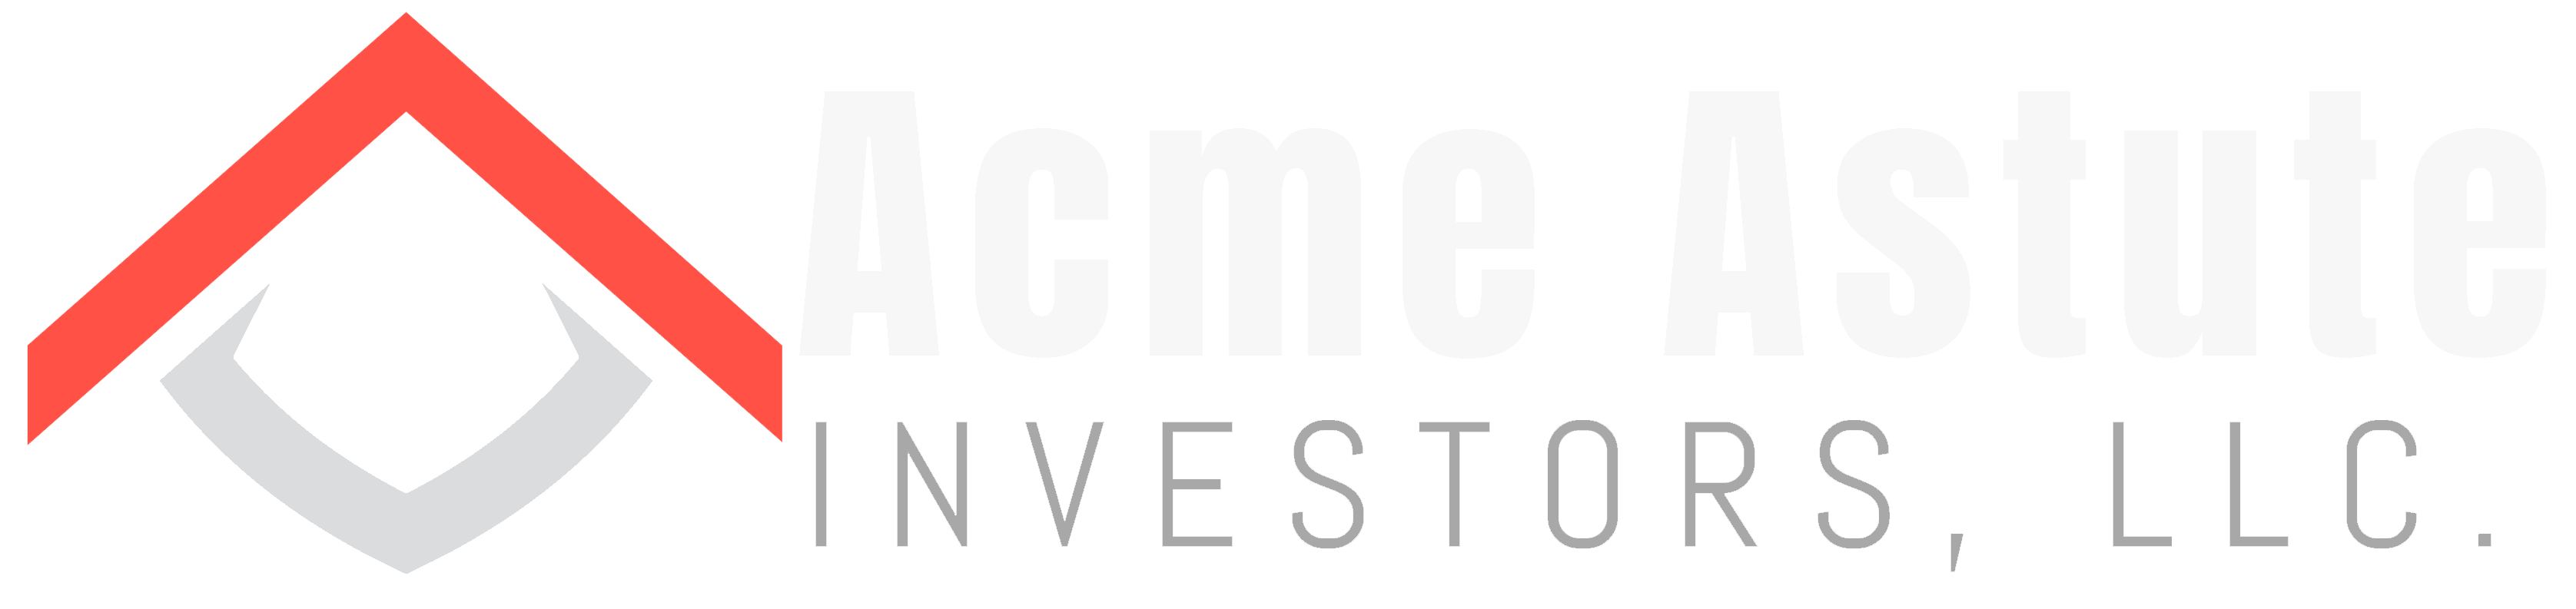 Acme Astute Investors LLCArchitecture is not based on concrete and steel